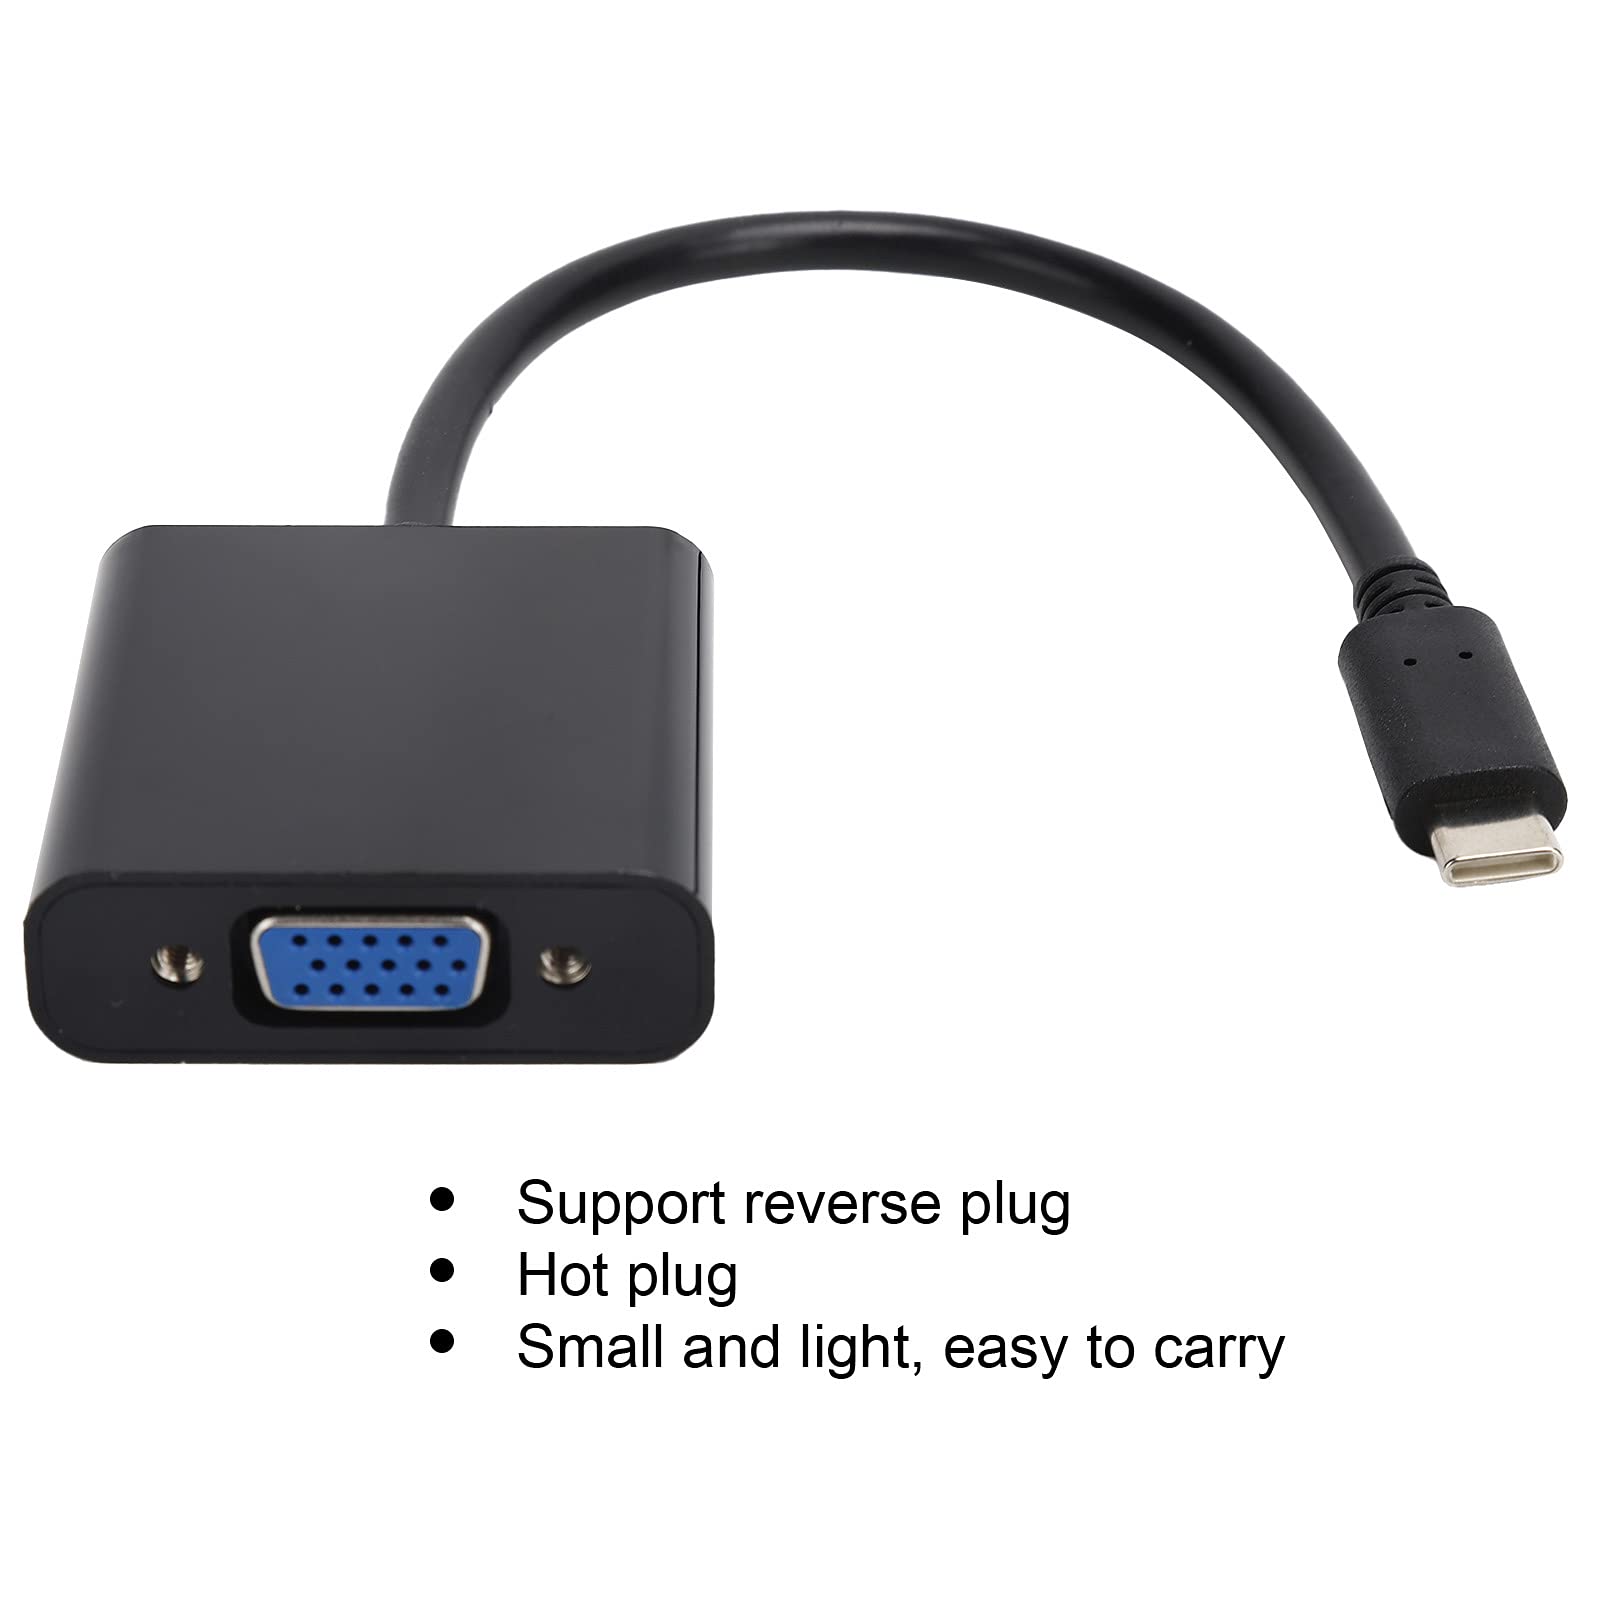 ASHATA 753 USBC to VGA Adapter, USB 3.1 Type‑C to VGA HD 1080P Video Adapter, 10Gbps Type‑C to VGA Converter Compatible with Laptop, Tablet